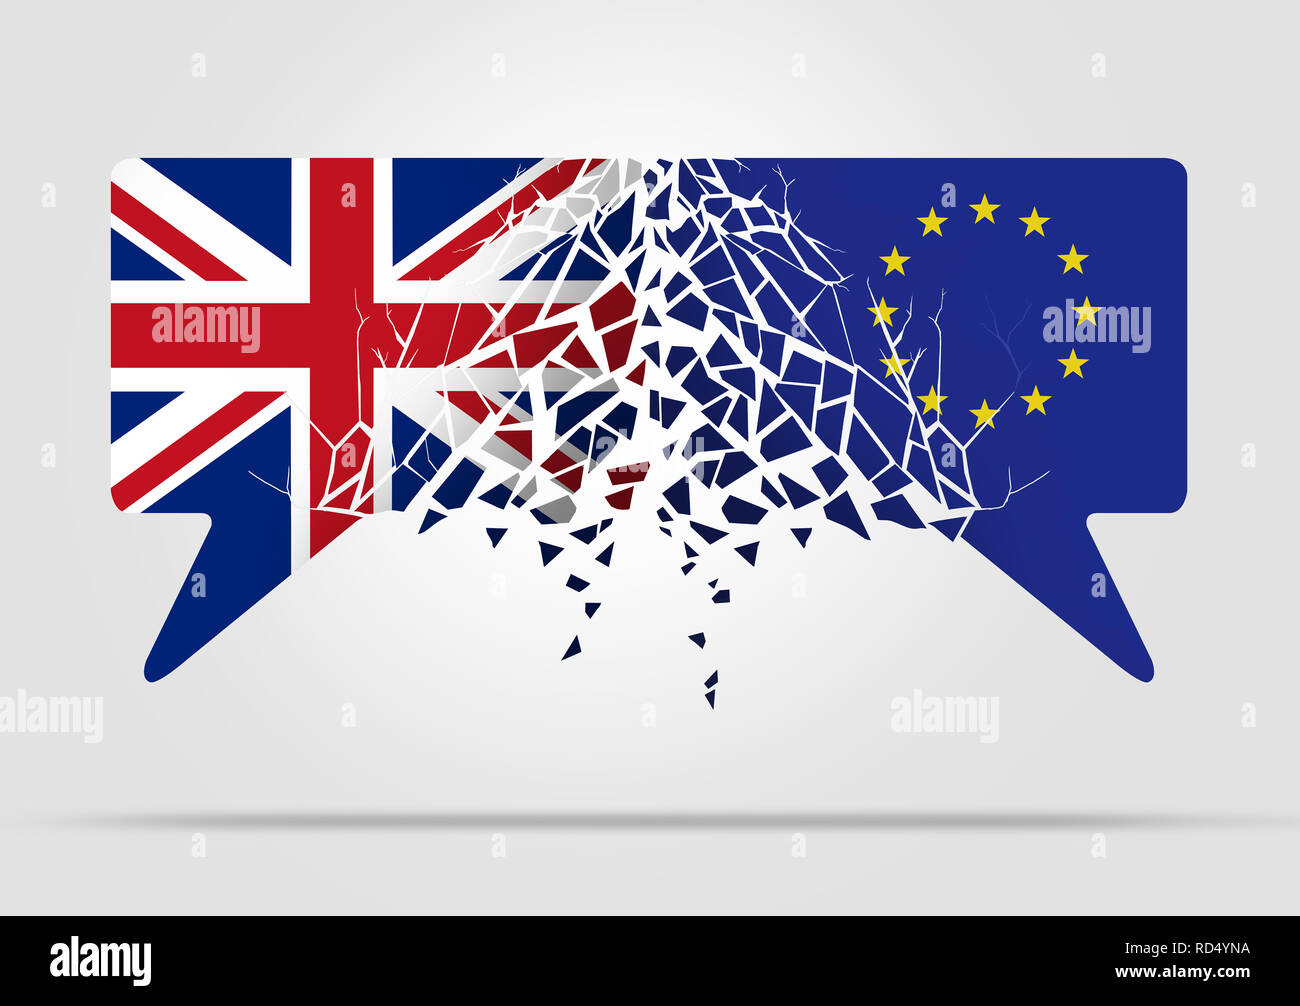 European Community and United Kingdom broken communication symbol with the flag of the UK and Europe in a 3D illustration style. Stock Photo